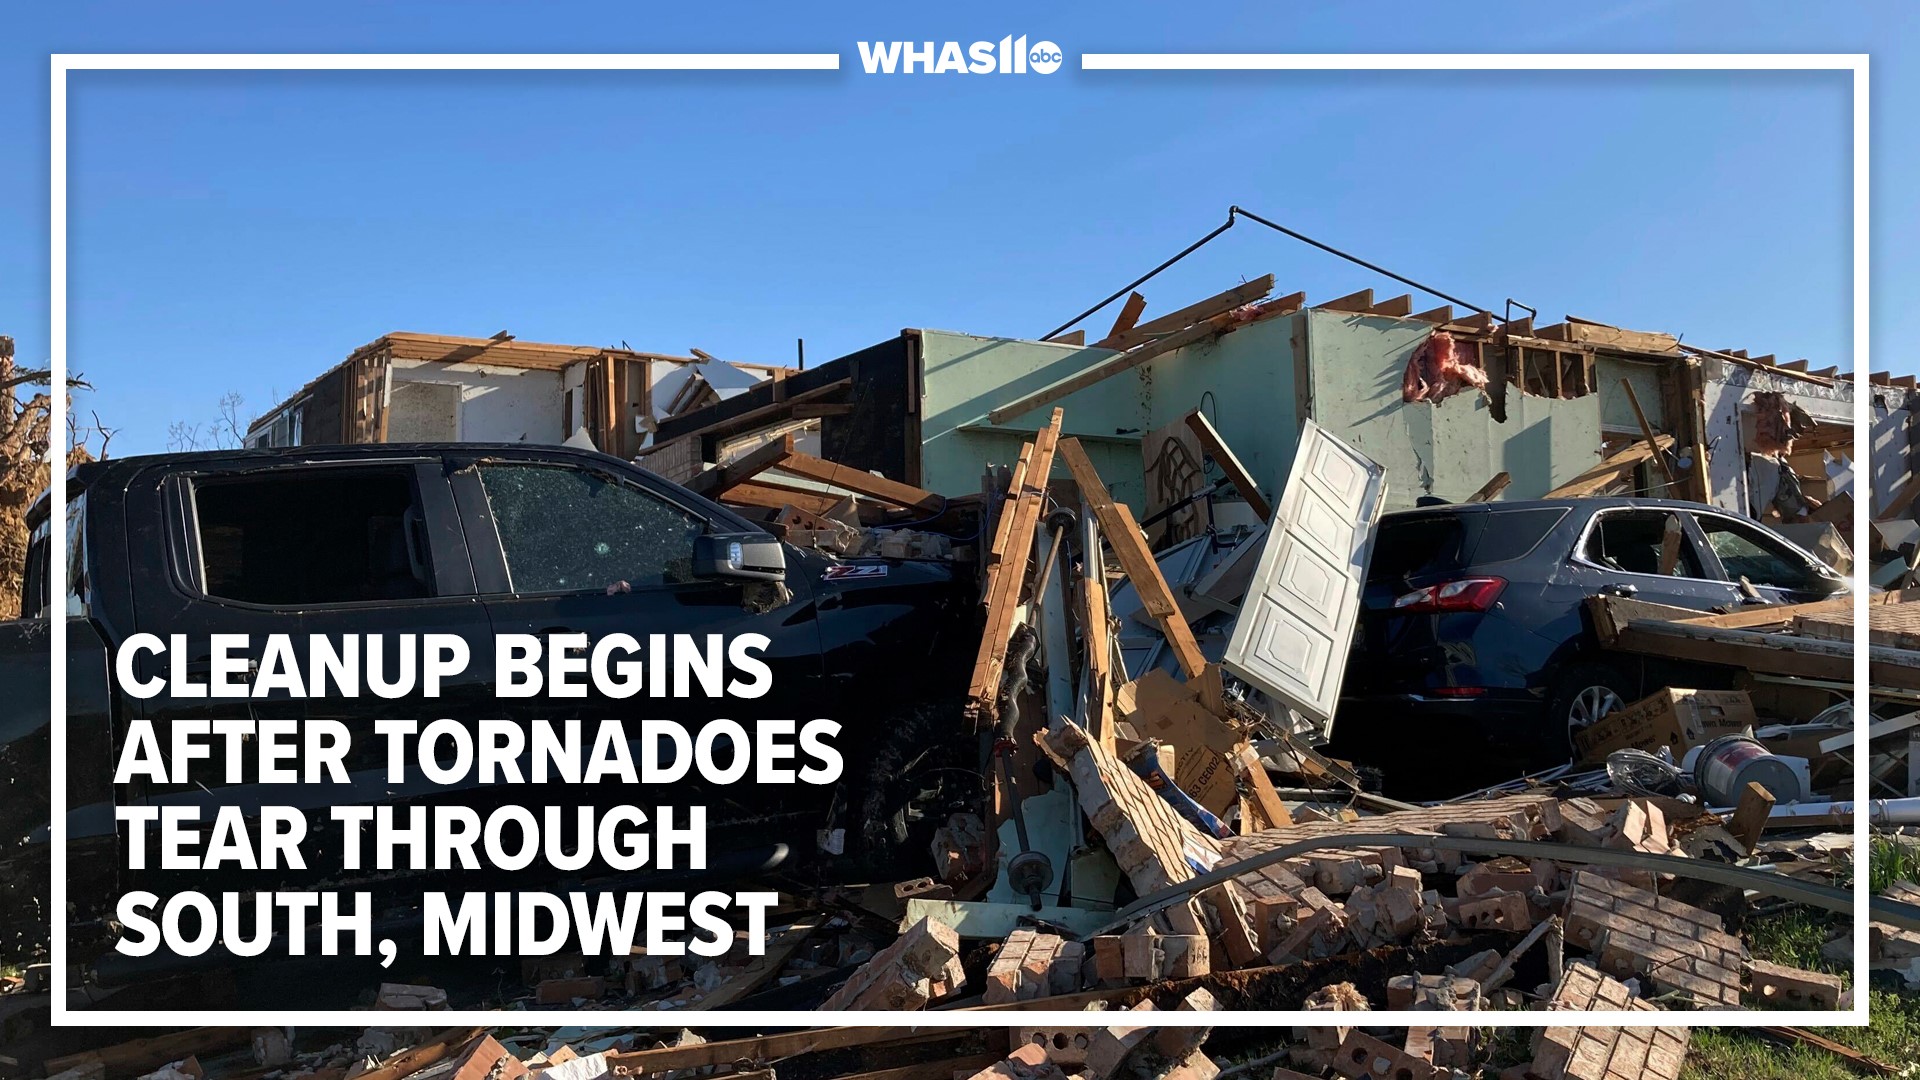 At least 50 locations reported tornado damage across Arkansas, Mississippi, Iowa, Tennessee, Illinois and Wisconsin after Friday's severe weather outbreak.